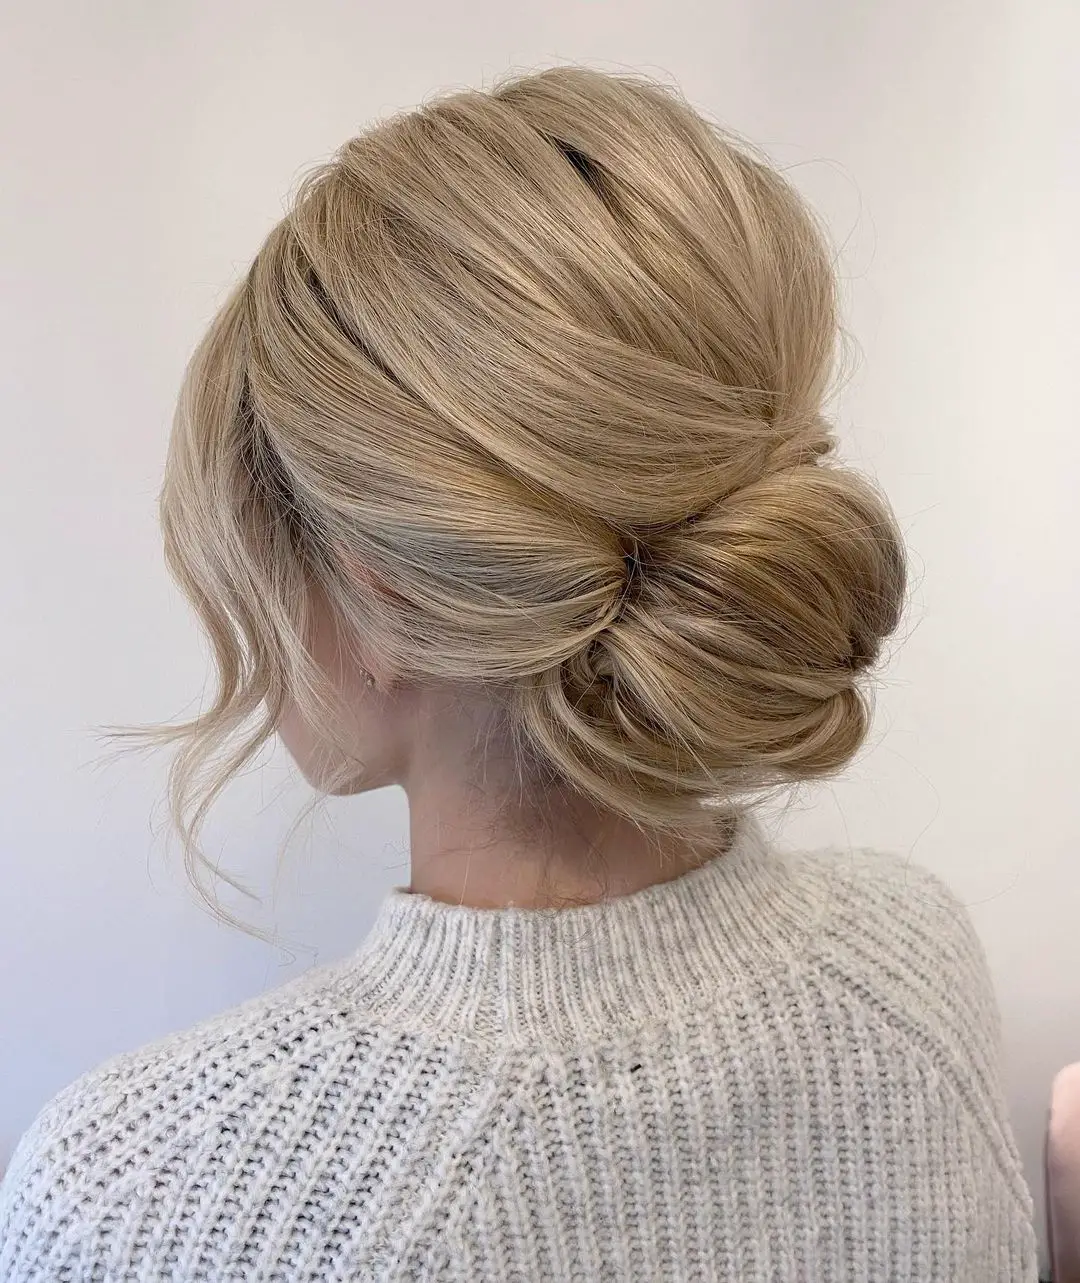 Top 10 Trending Professional Interview Hairstyles for Women